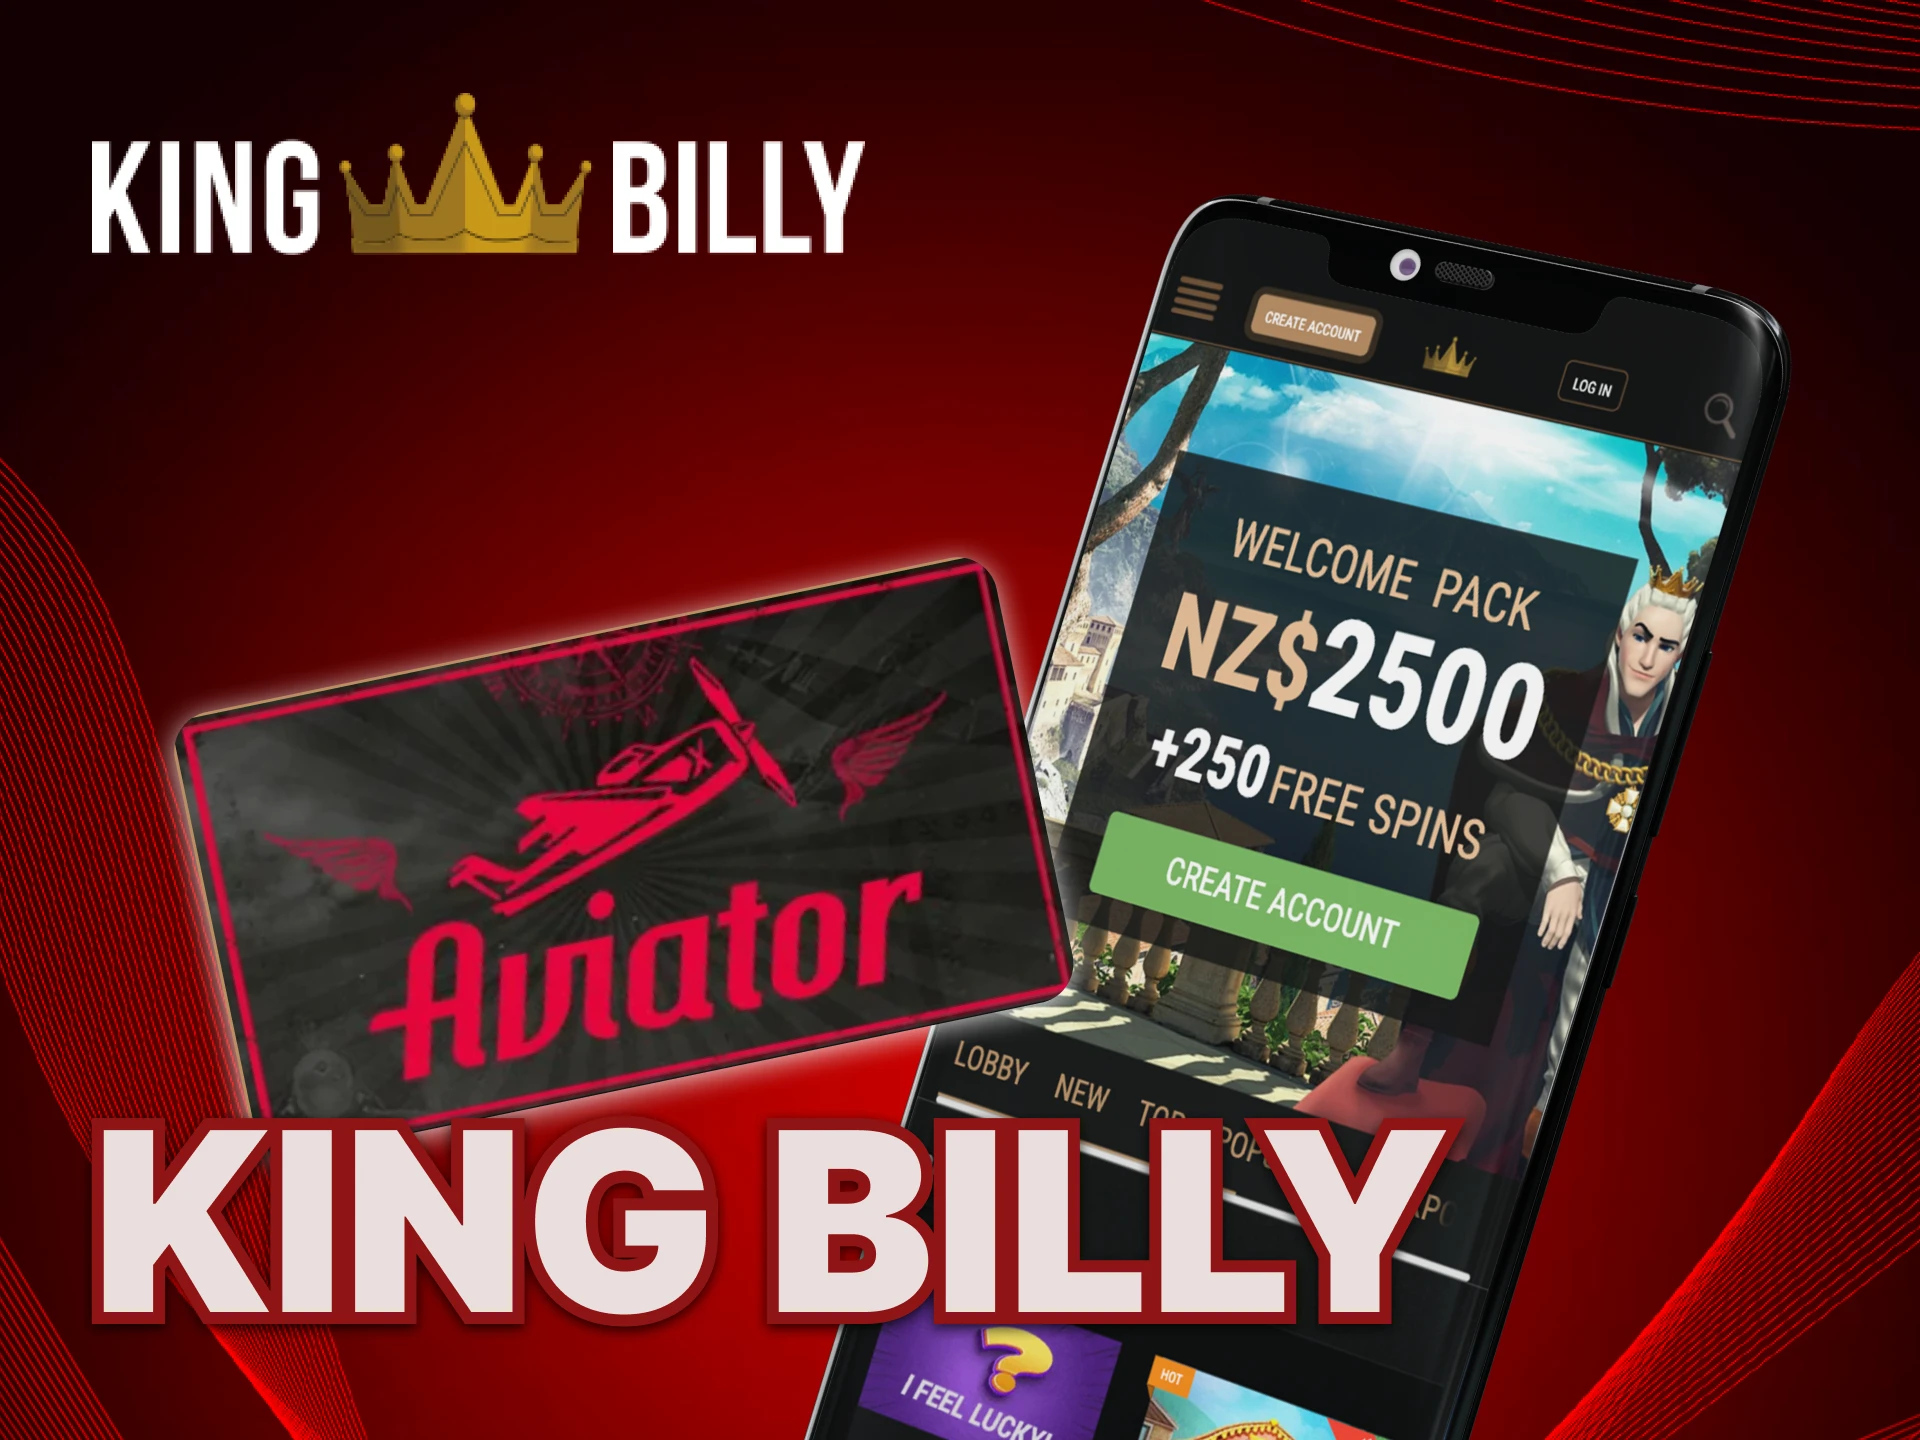 What options are there in the King Billy mobile app.